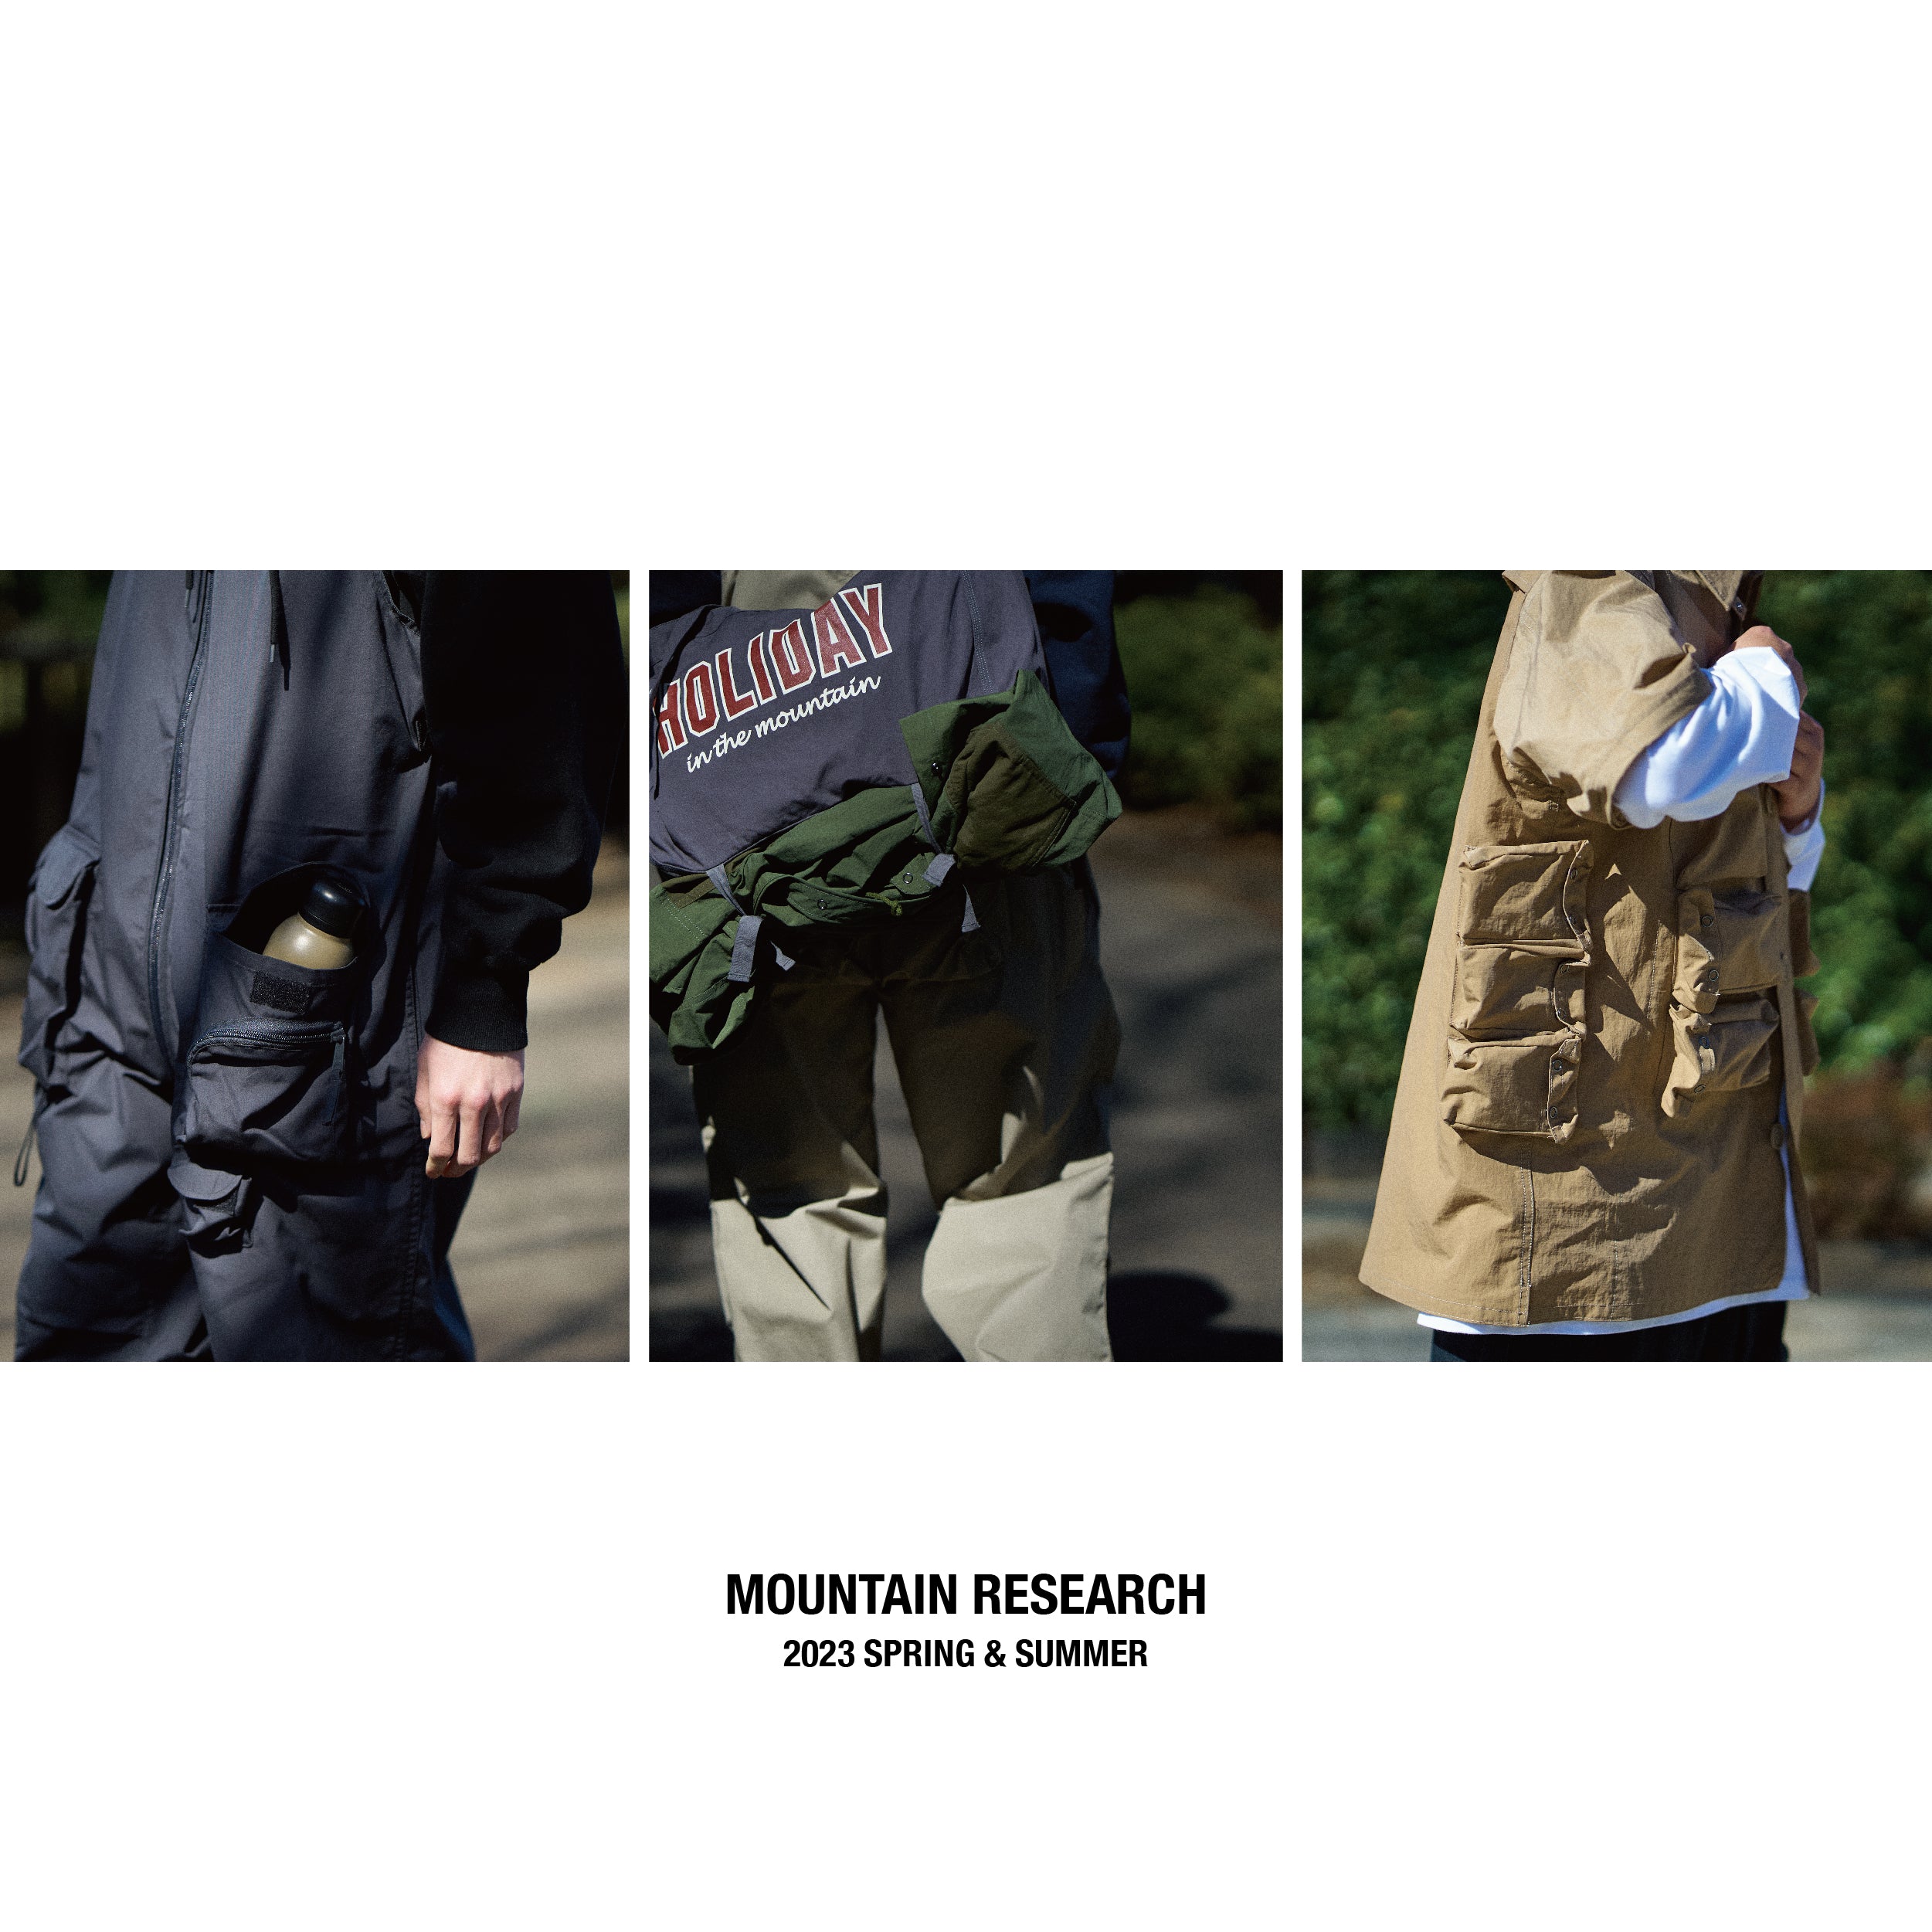 MOUNTAIN RESEARCH 23SS RECOMMEND ITEMS 